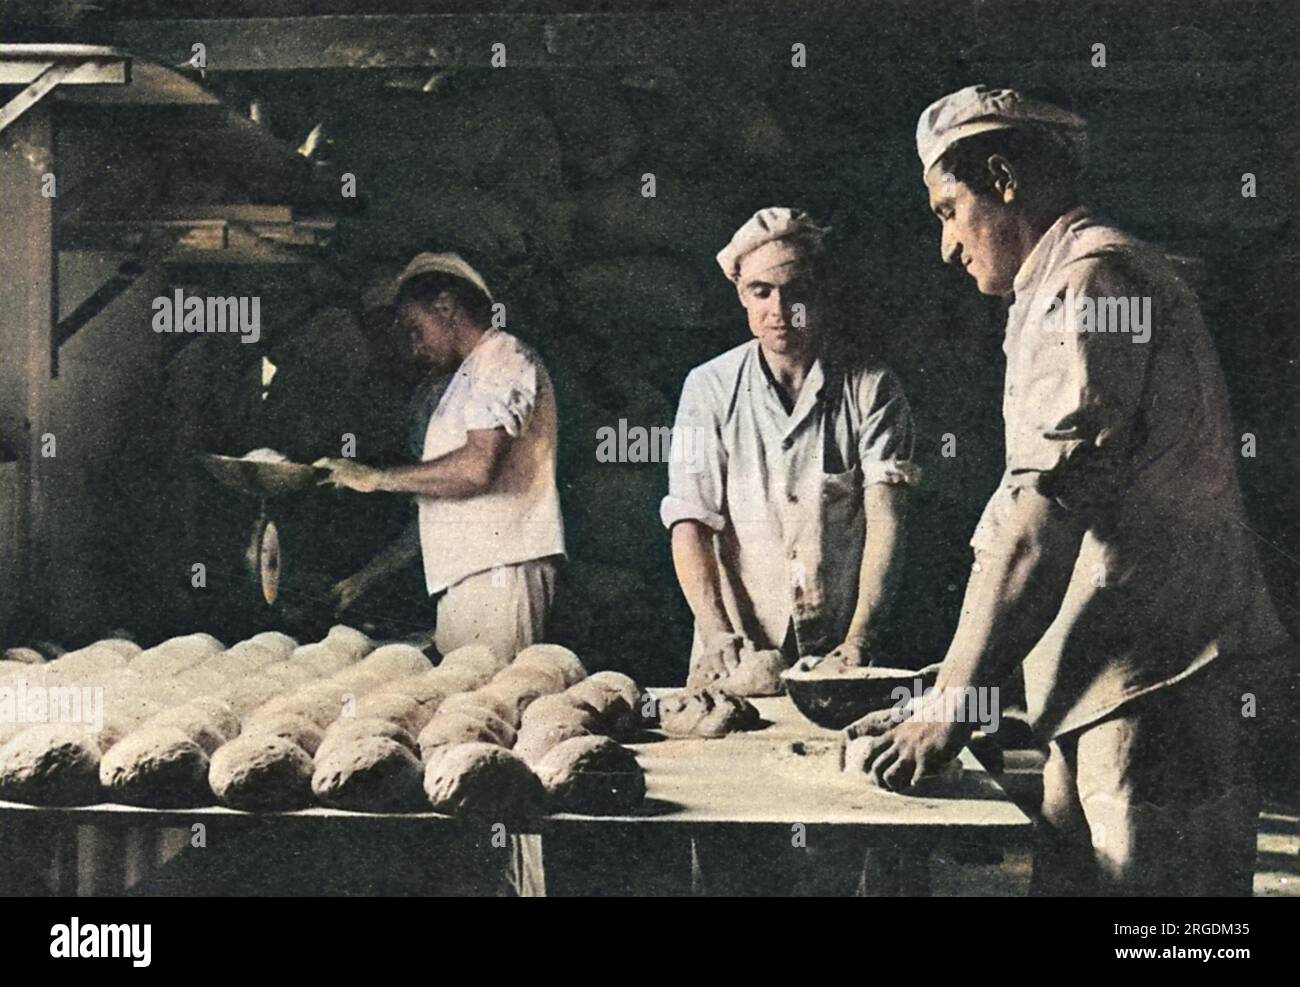 German prisoners in Britain post-World War Two. Rolling dough for the camp's bread, a highly skilled job performed by prisoners who were all bakers before the war, with excellent results. The ILN writes that the prisoners have only one real complaint - uncertainty, and that at the time of writing the British Government had not yet announced its future plans even though hostilities ceased over a year before. Stock Photo